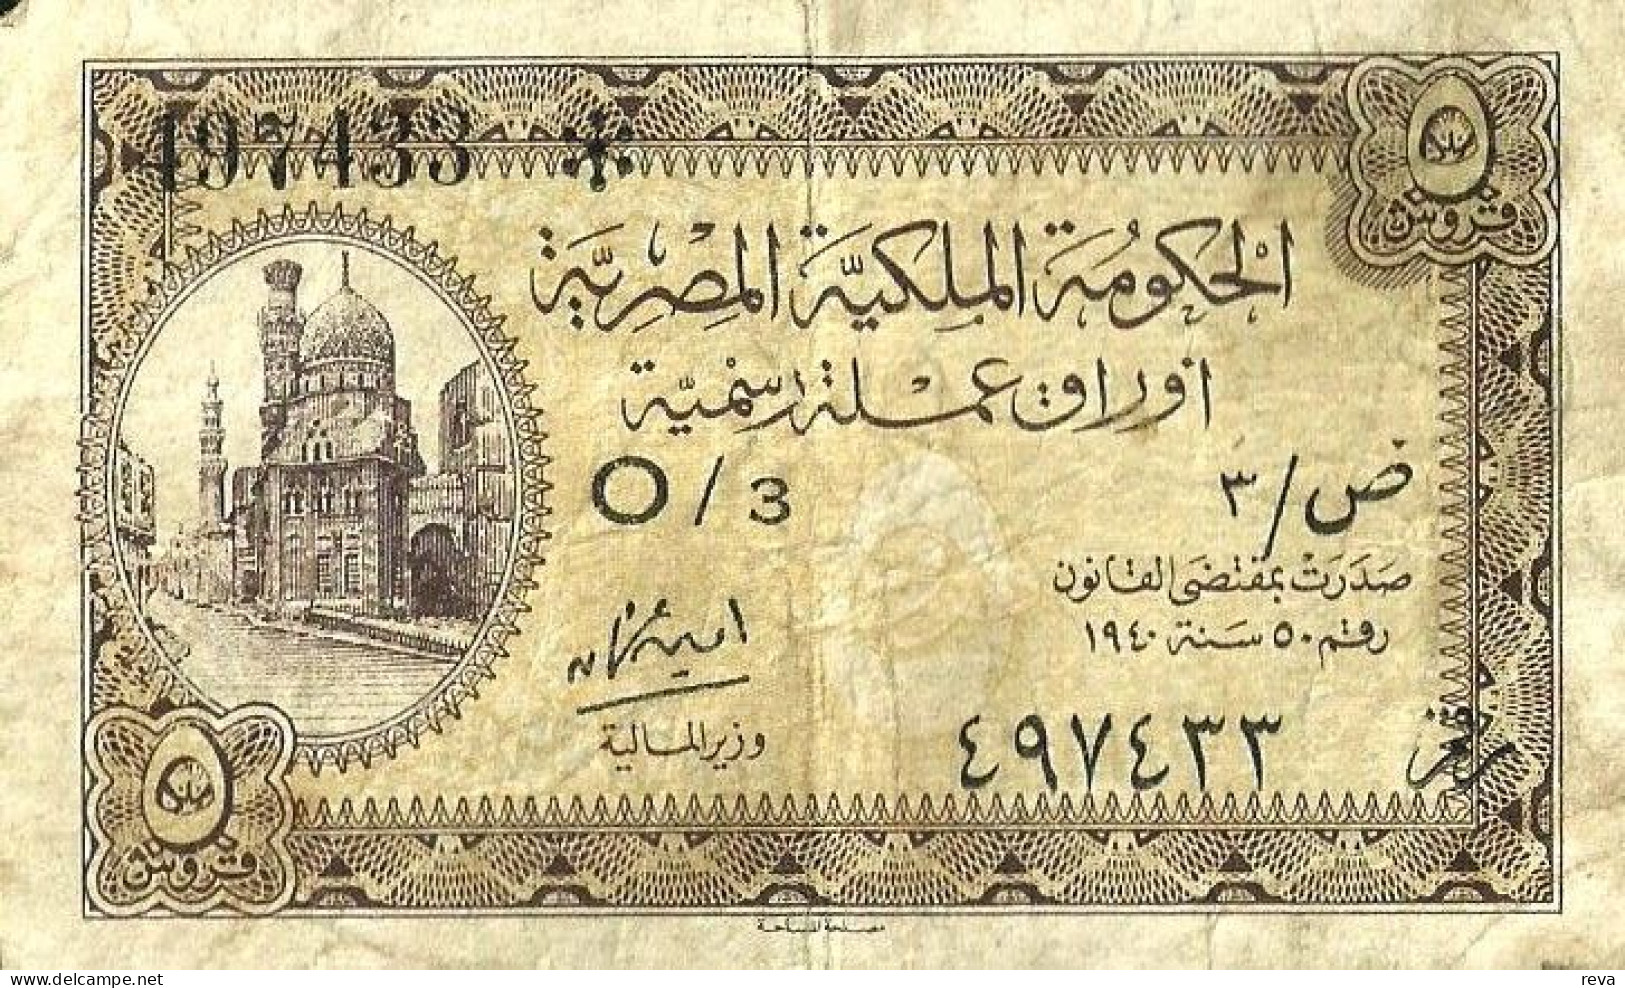 EGYPT 5 PIASTRES BROWN MOSQUE FRONT MOTIF BACK DATED UNDER LAW OF1940 SIGN 4 P165d F+ SCARCE READ DESCRIPTION !! - Egipto